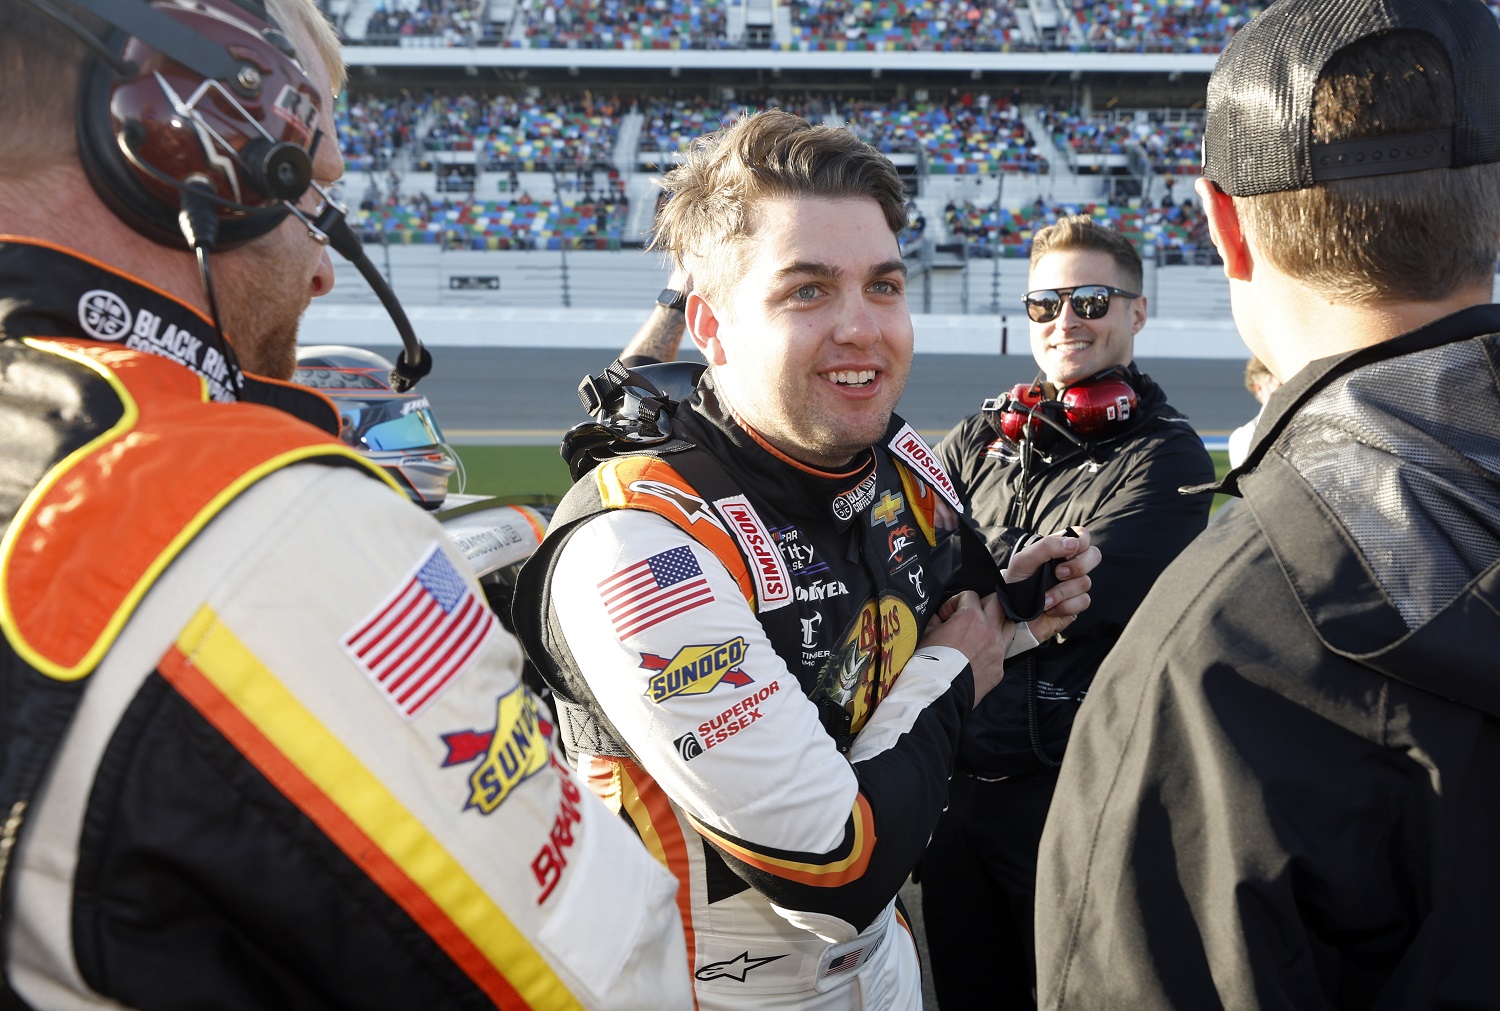 Noah Gragson talks with crew on the grid prior to the NASCAR Xfinity Series race at Daytona International Speedway on Feb. 19, 2022. | Chris Graythen/Getty Images